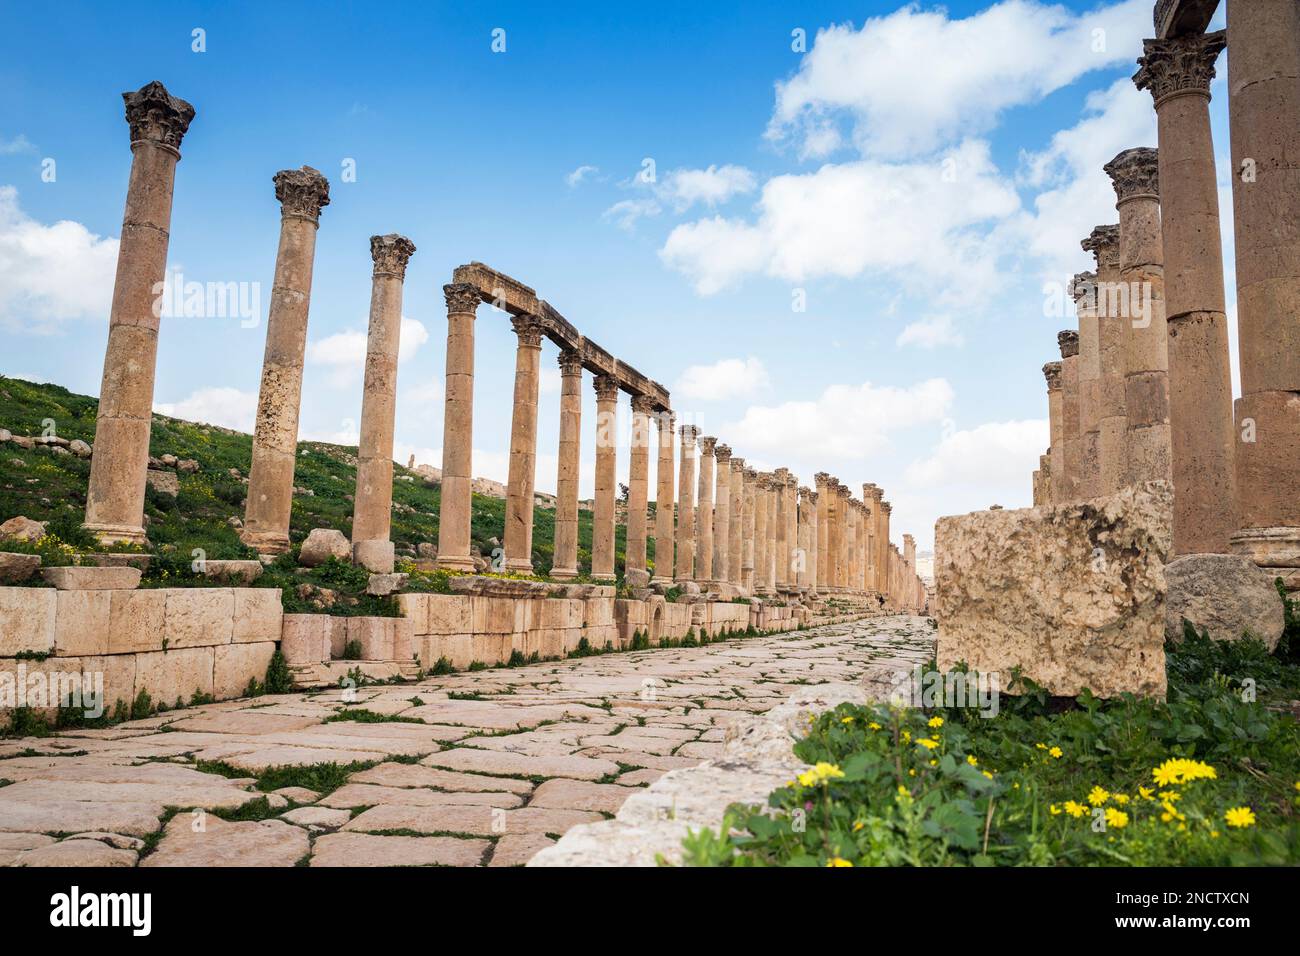 The great colonnade street at the ancient greco-roman city of Jerash, Gerasa Governorate, Jordan Stock Photo